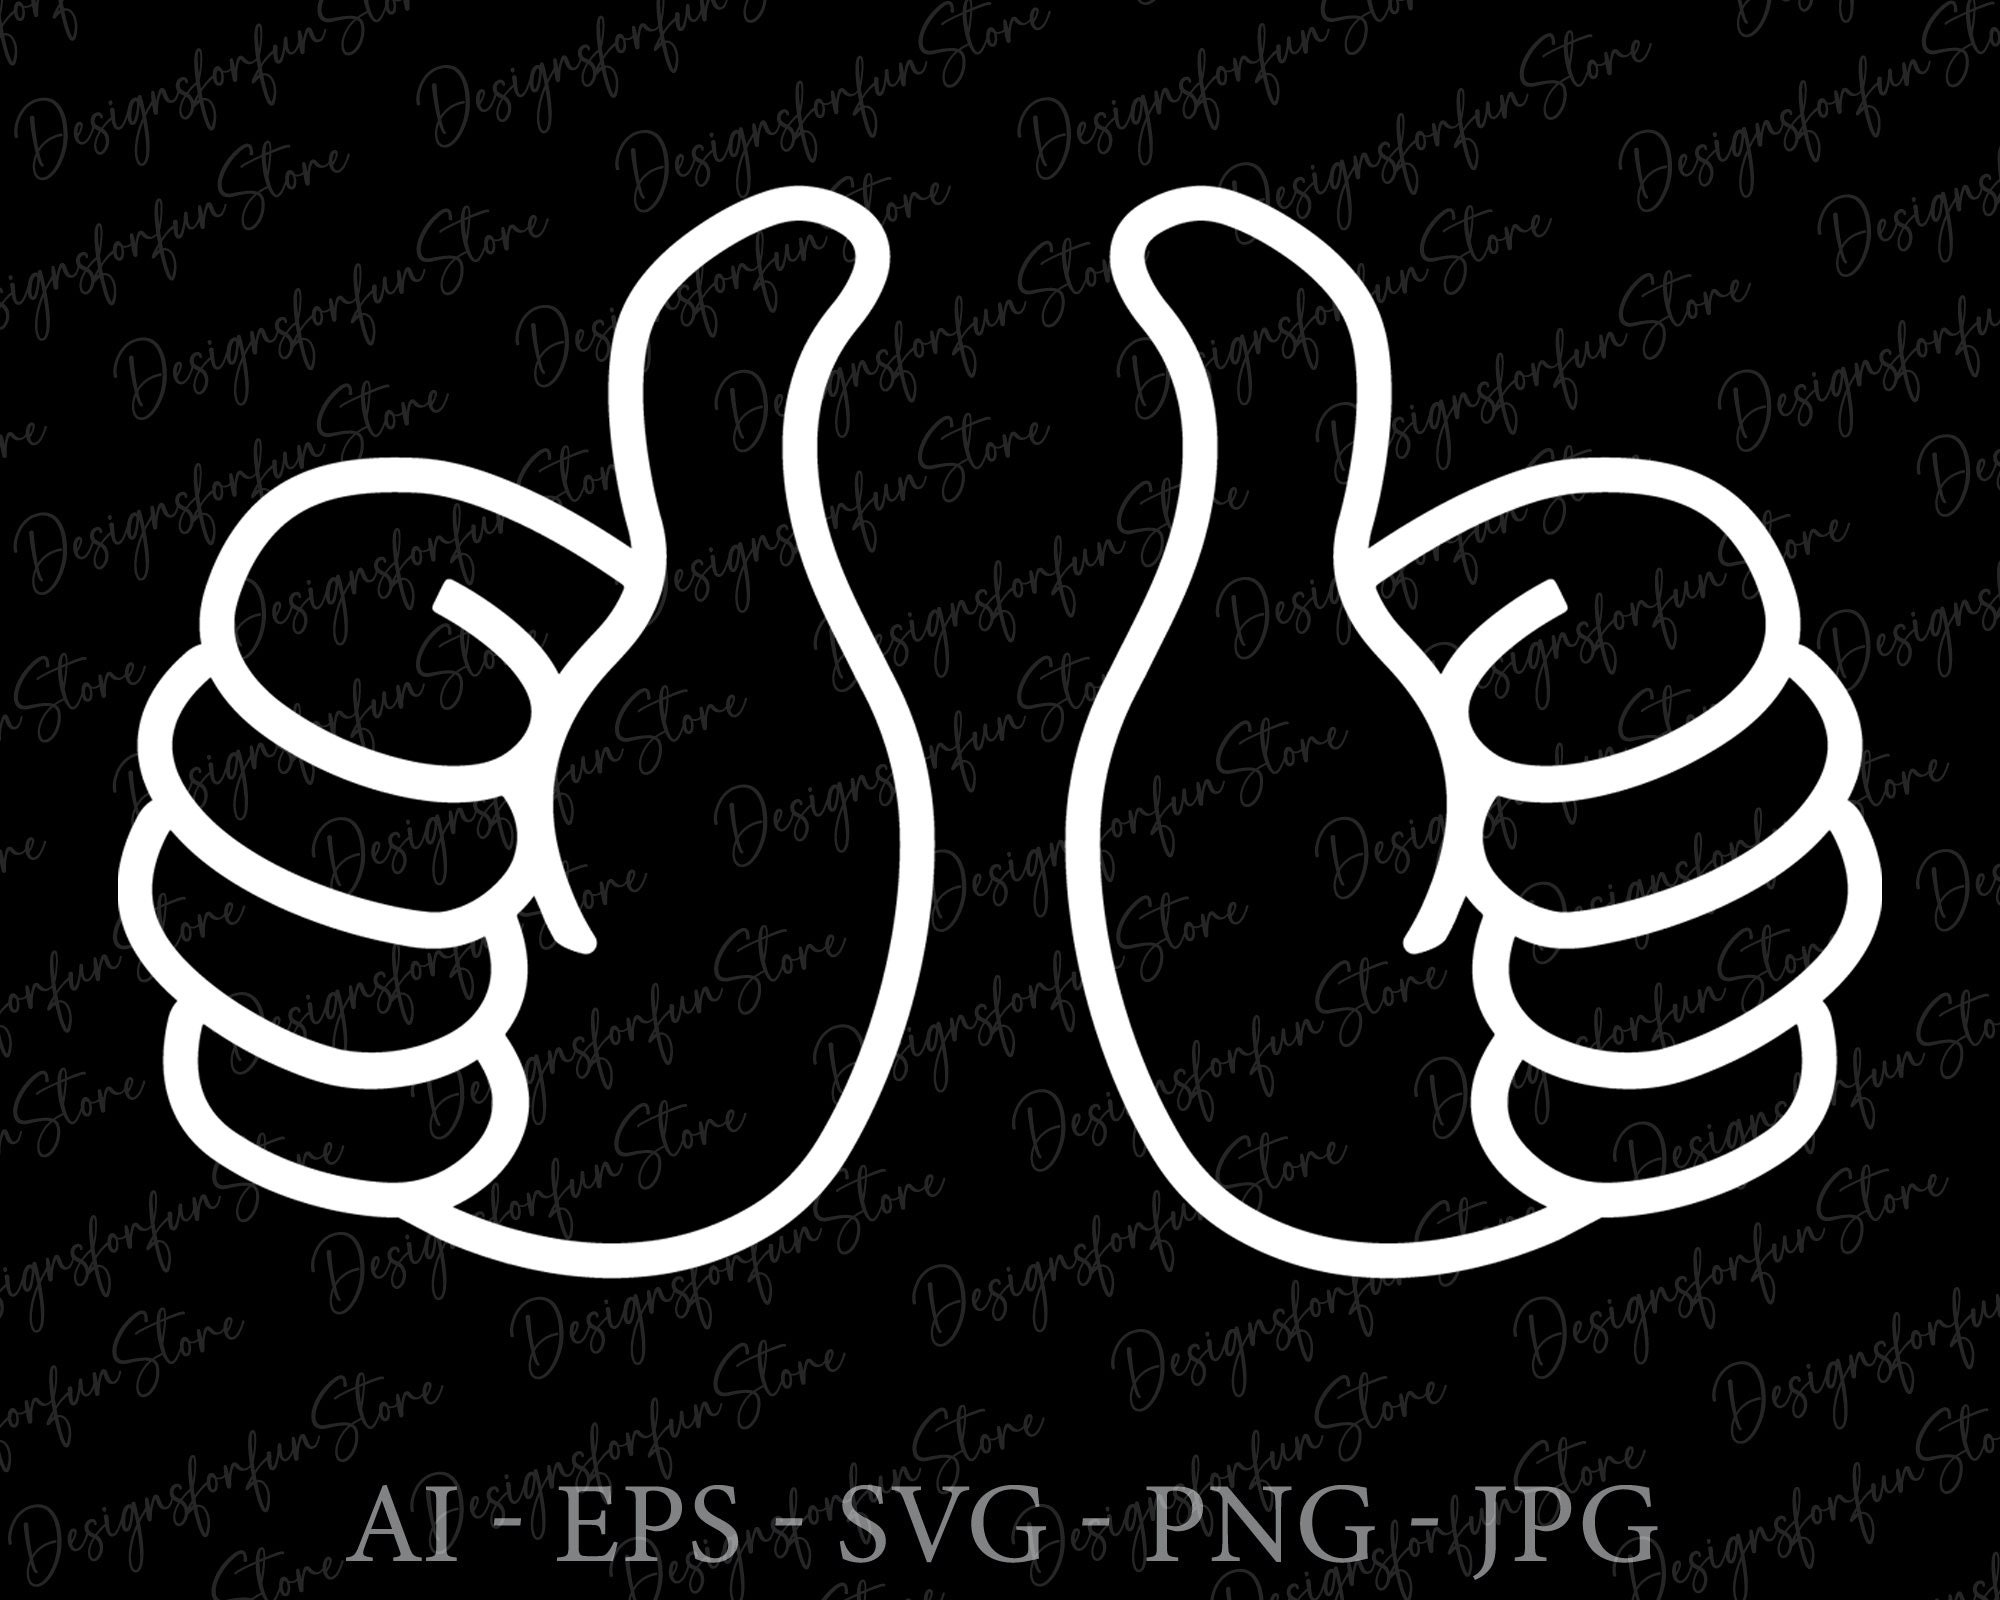 Thumbs Up Svg, Digital Download, Thumbs Up File, Silhouette, Like Svg,  Thumbs Up Sign Svg, Hand Svg, Printable, Funny Svg, Cricut Cut File